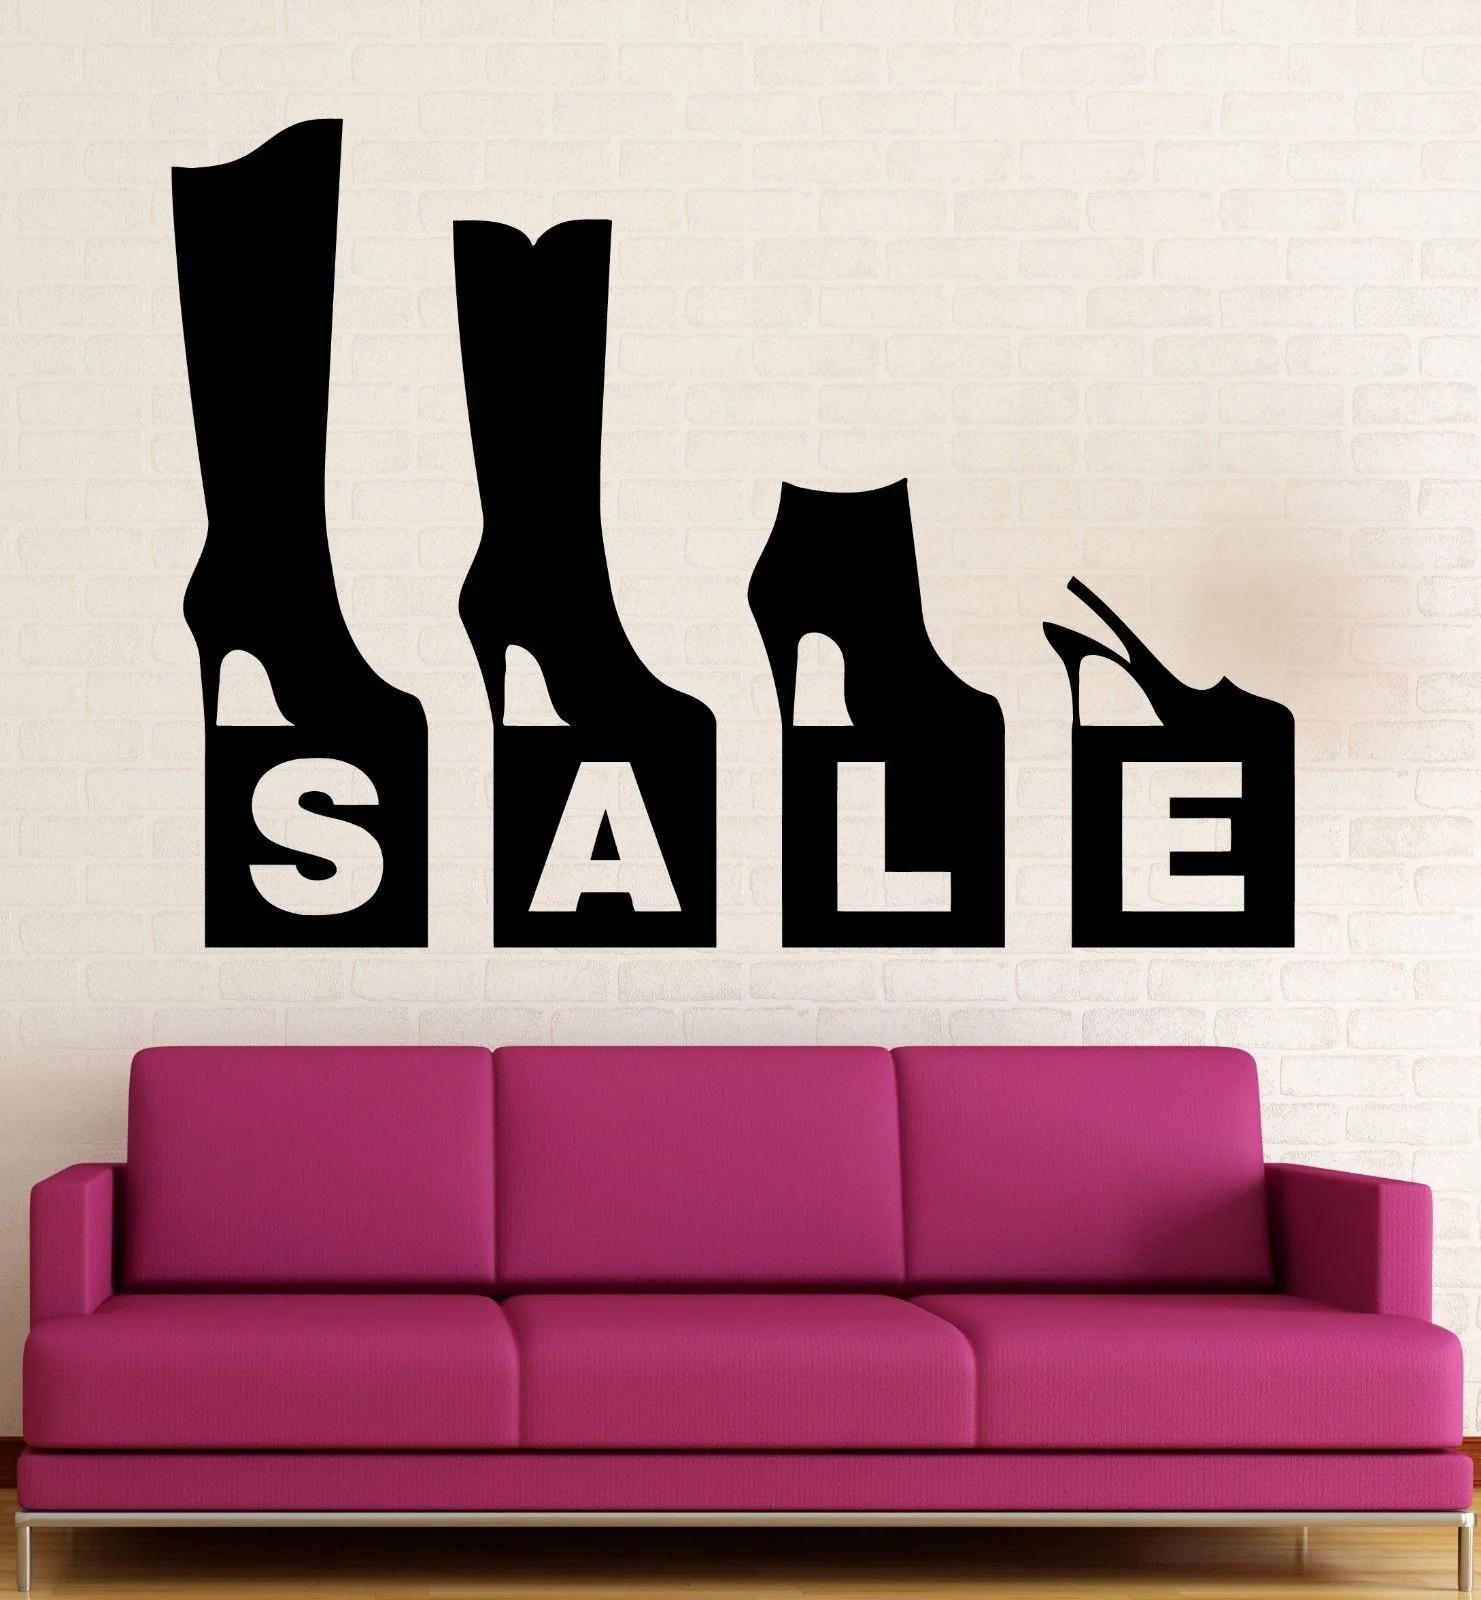 Shoe Store Wall Decal Sale Shopping Fashion SALE Quotes Window Decoration Vinyl Wall Sticker For Shops&Store ZS66